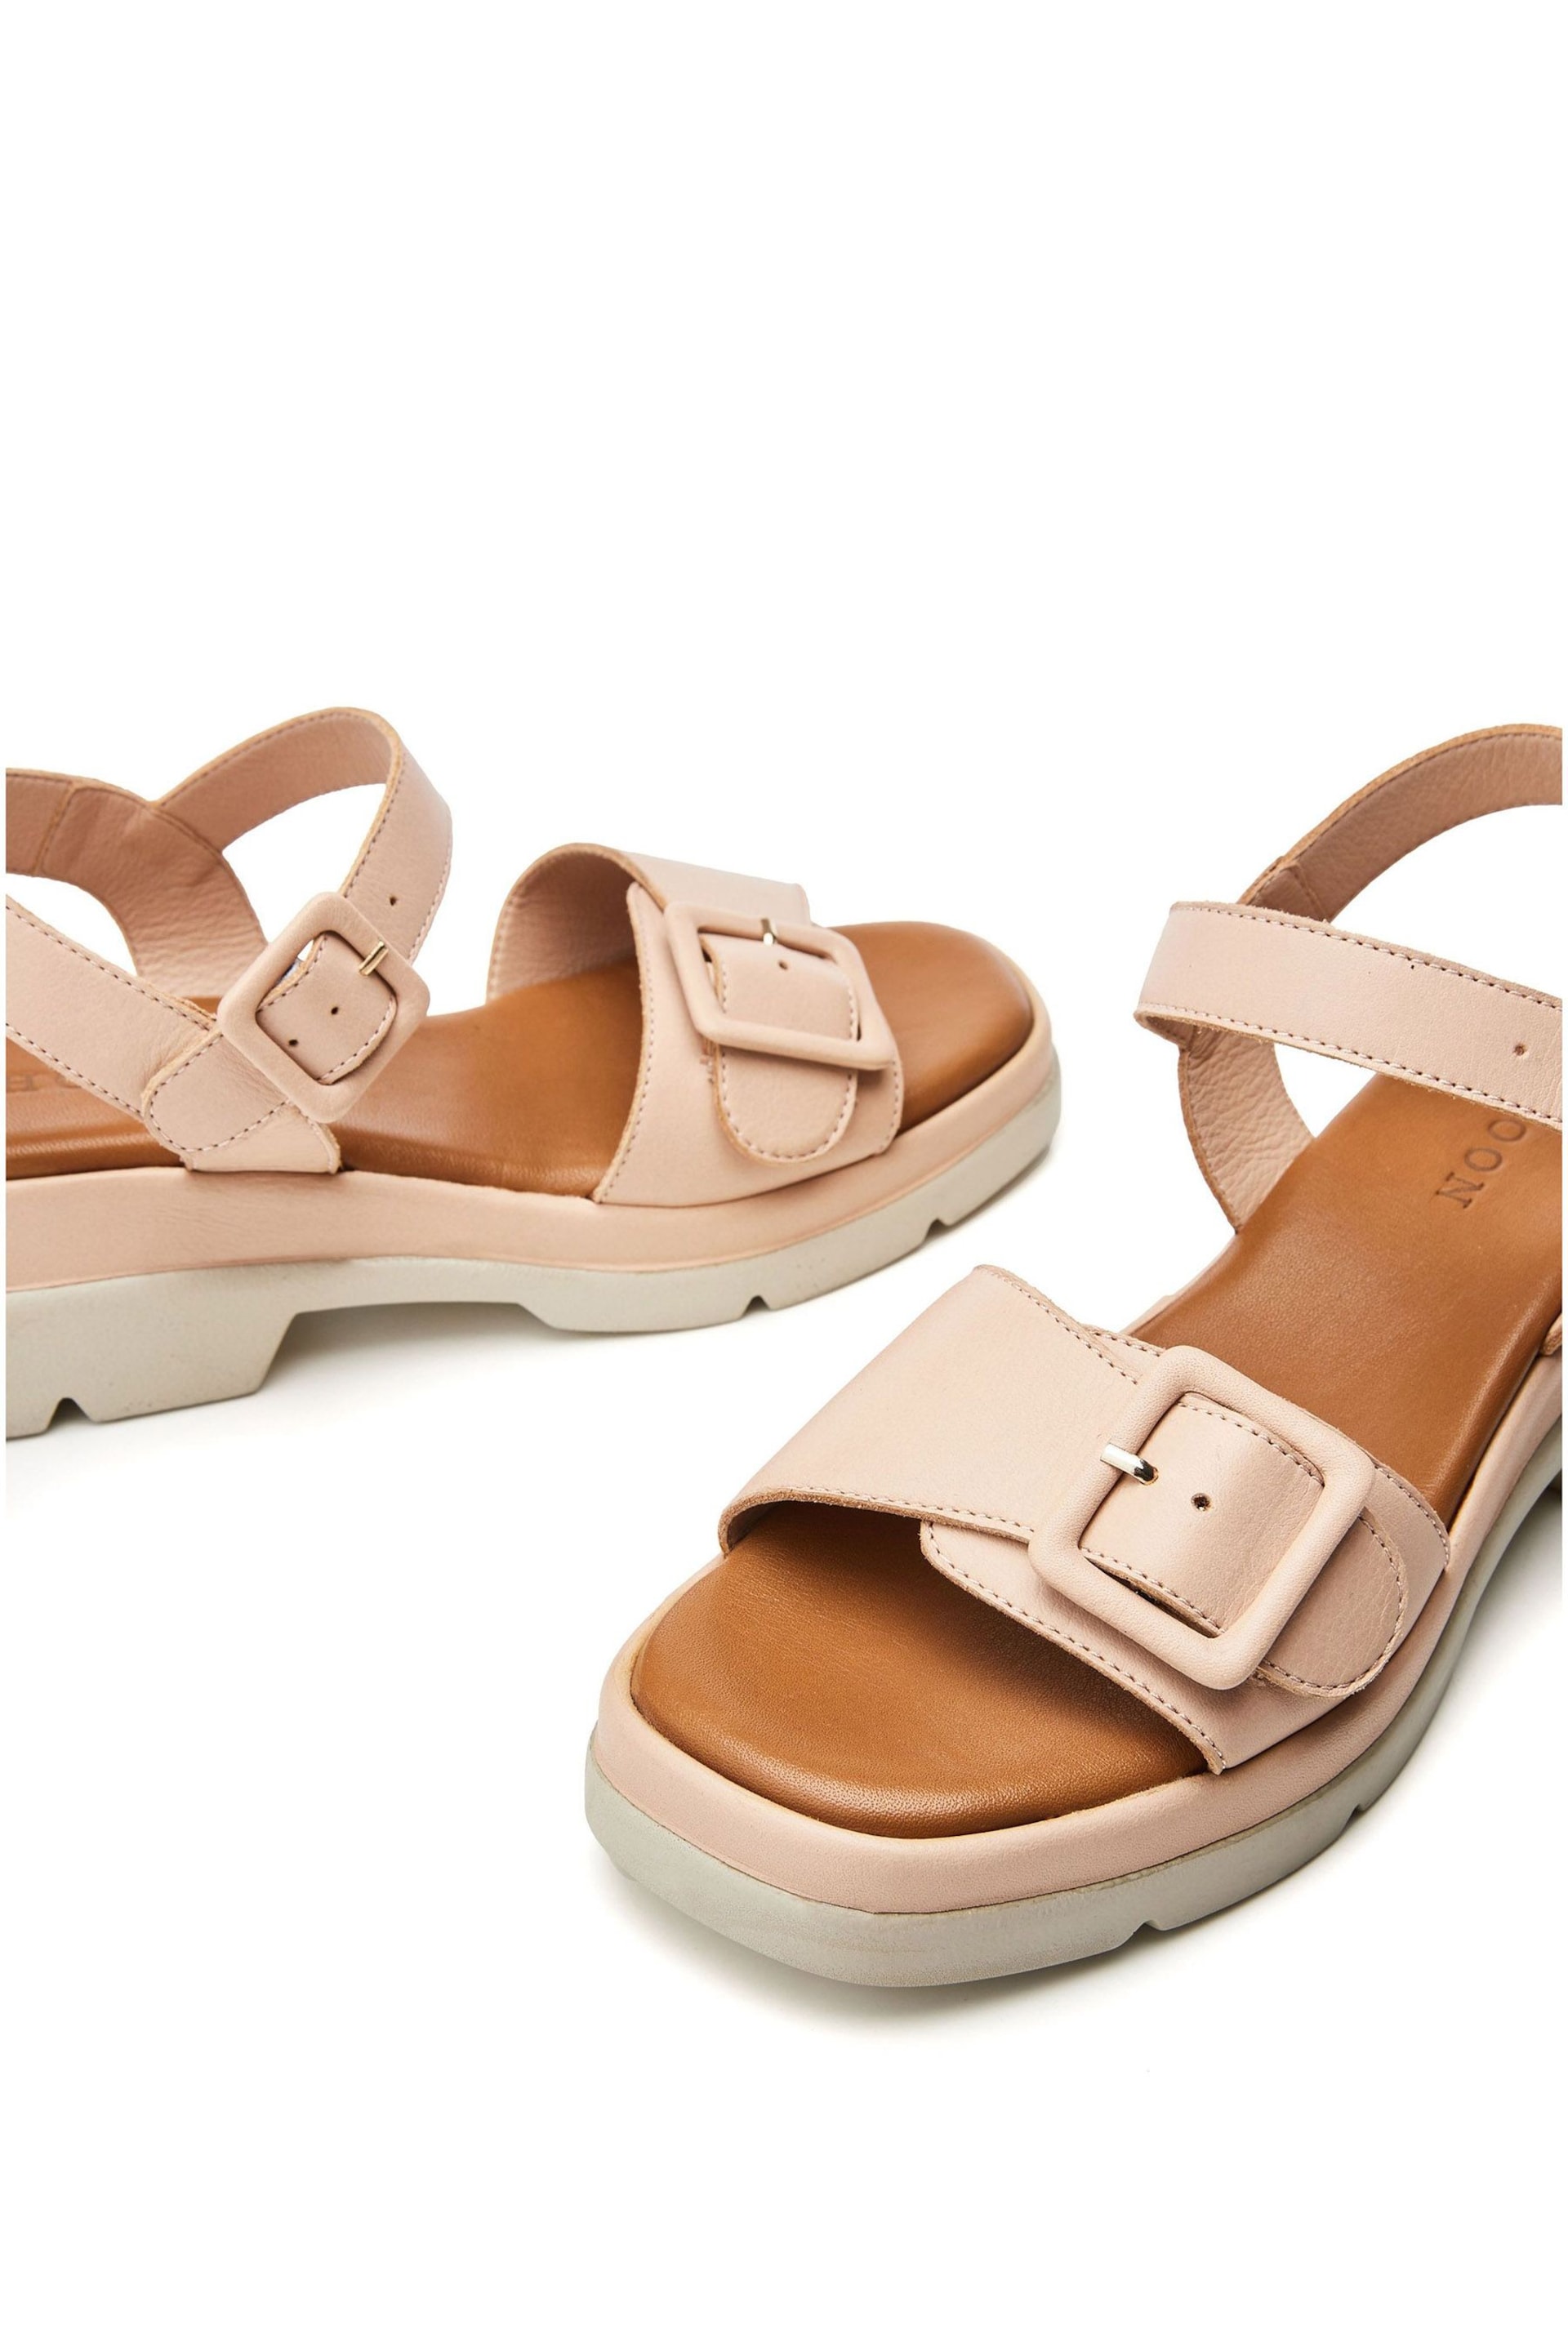 Moda in Pelle SH Shore Open Waist with Strap & Buckle Vamp Sandals - Image 4 of 4